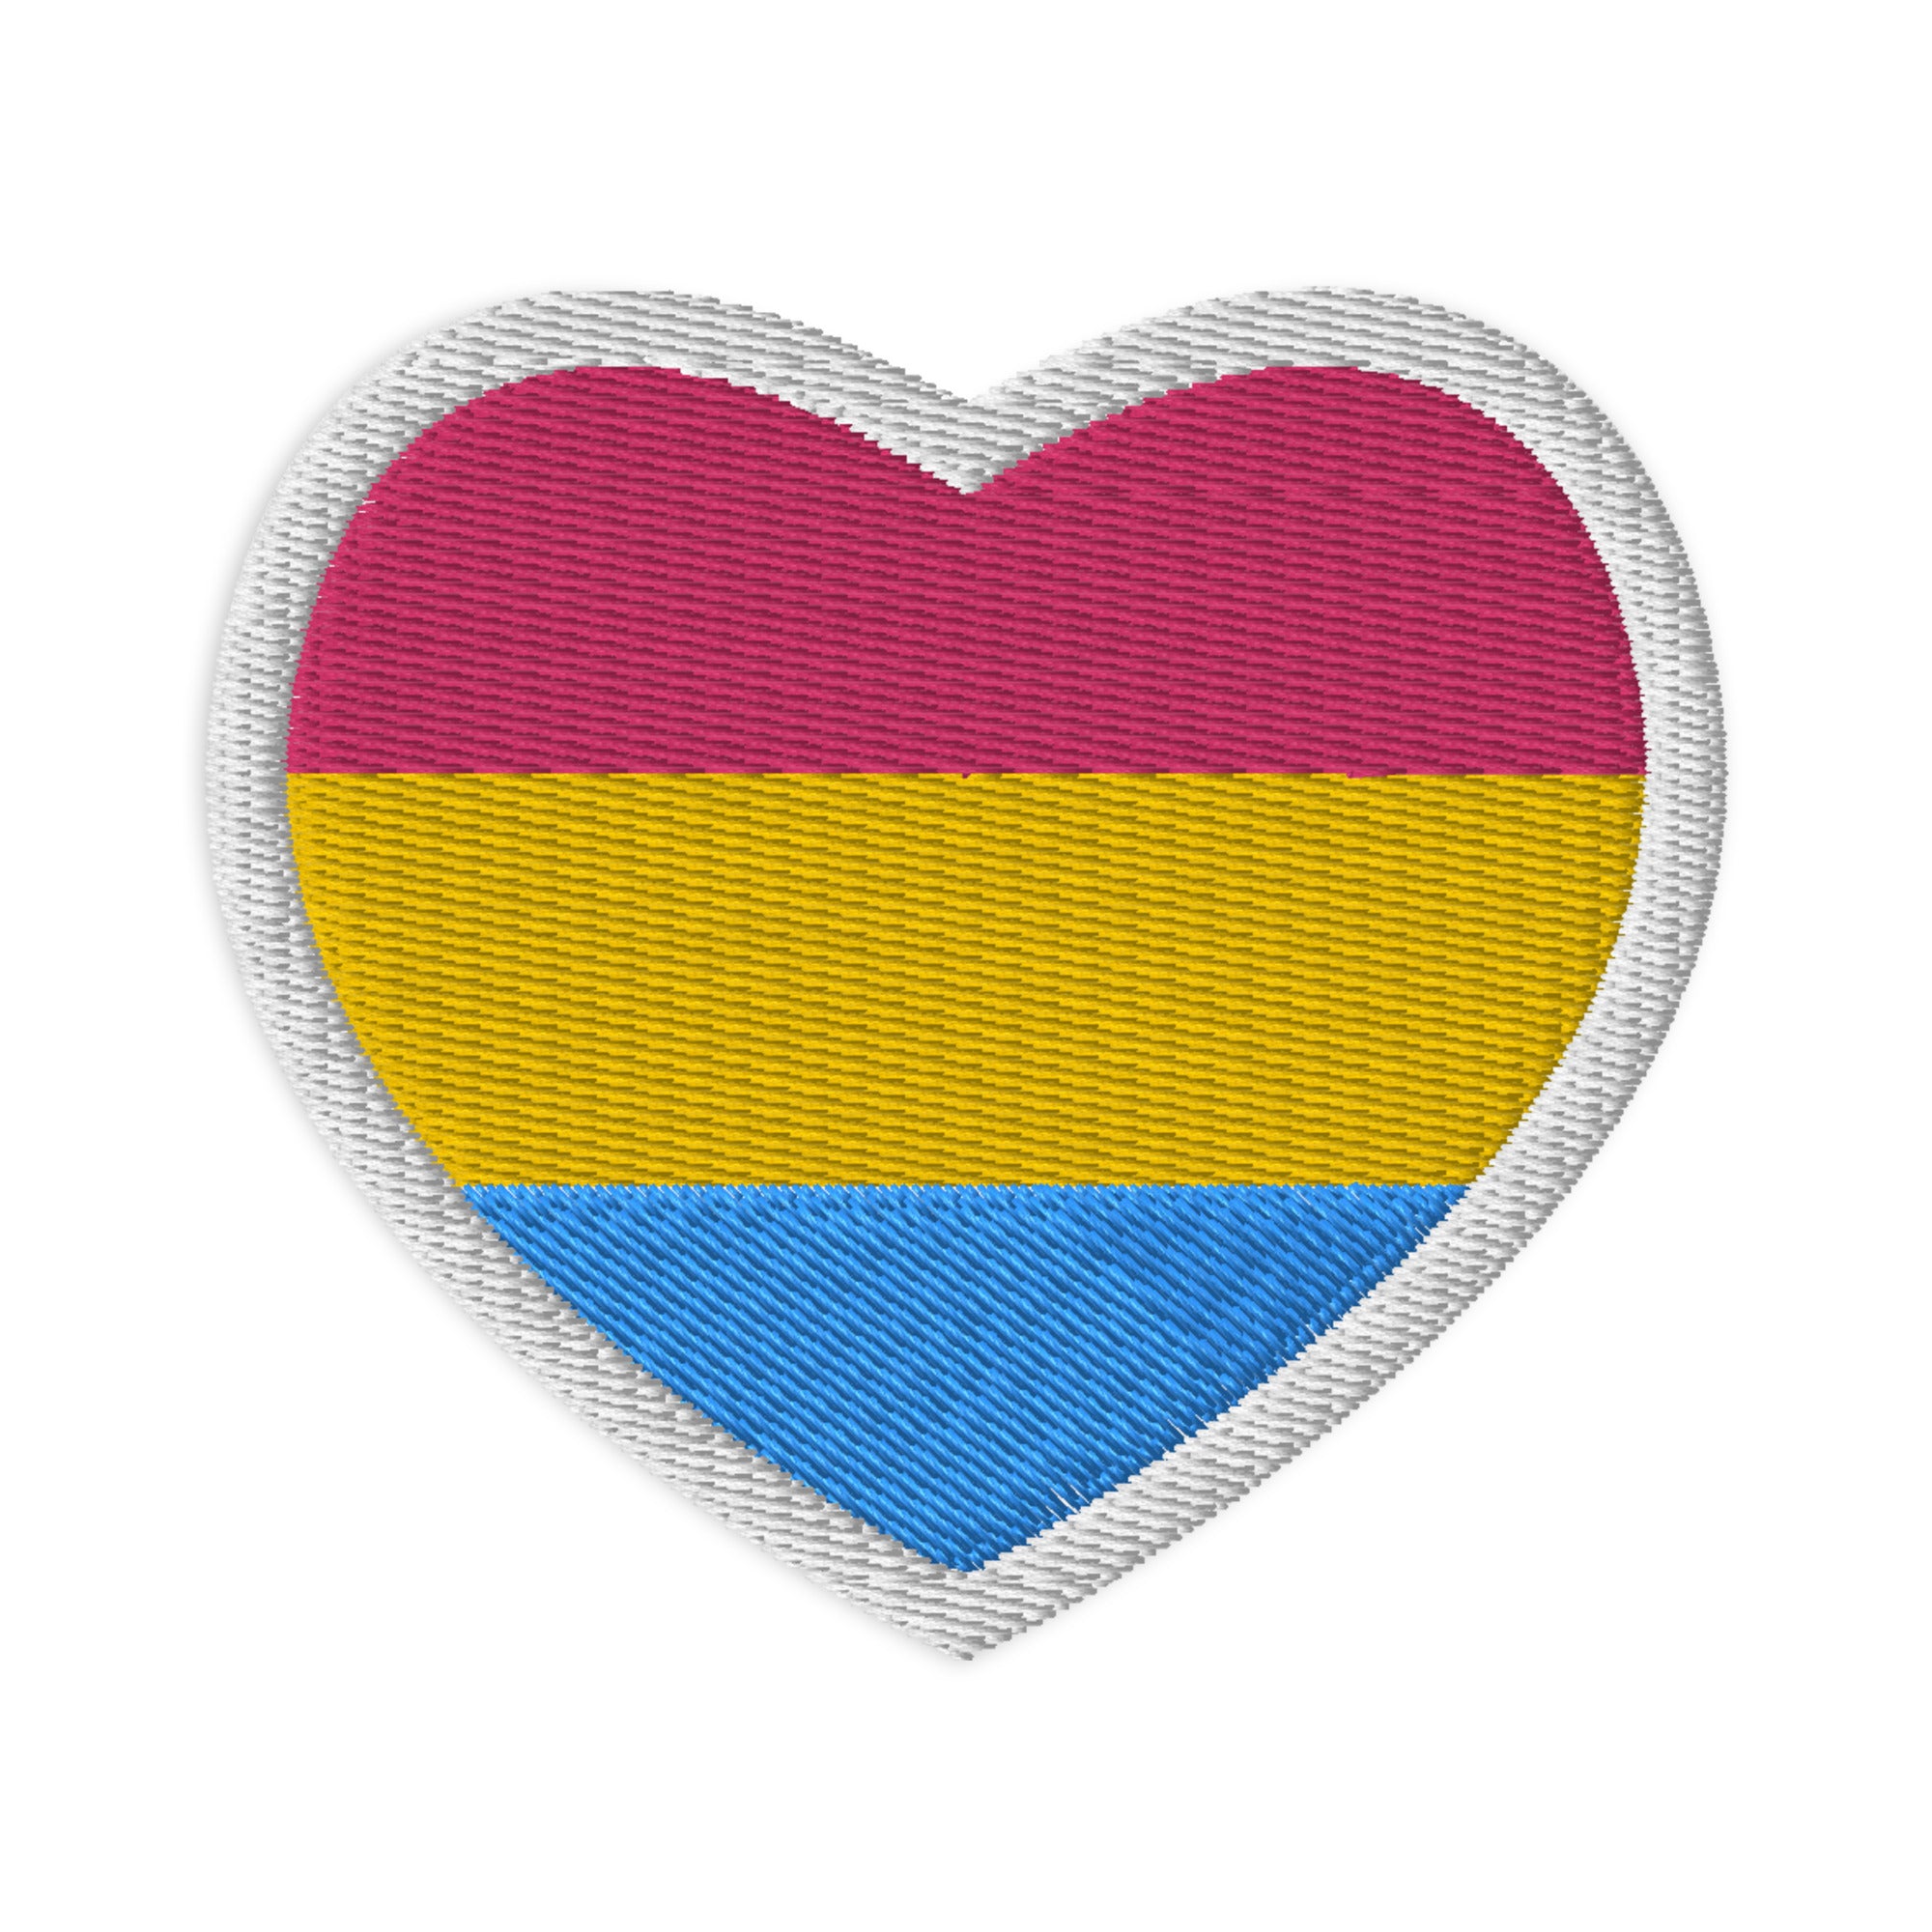 Pansexual Flag Embroidered Patch